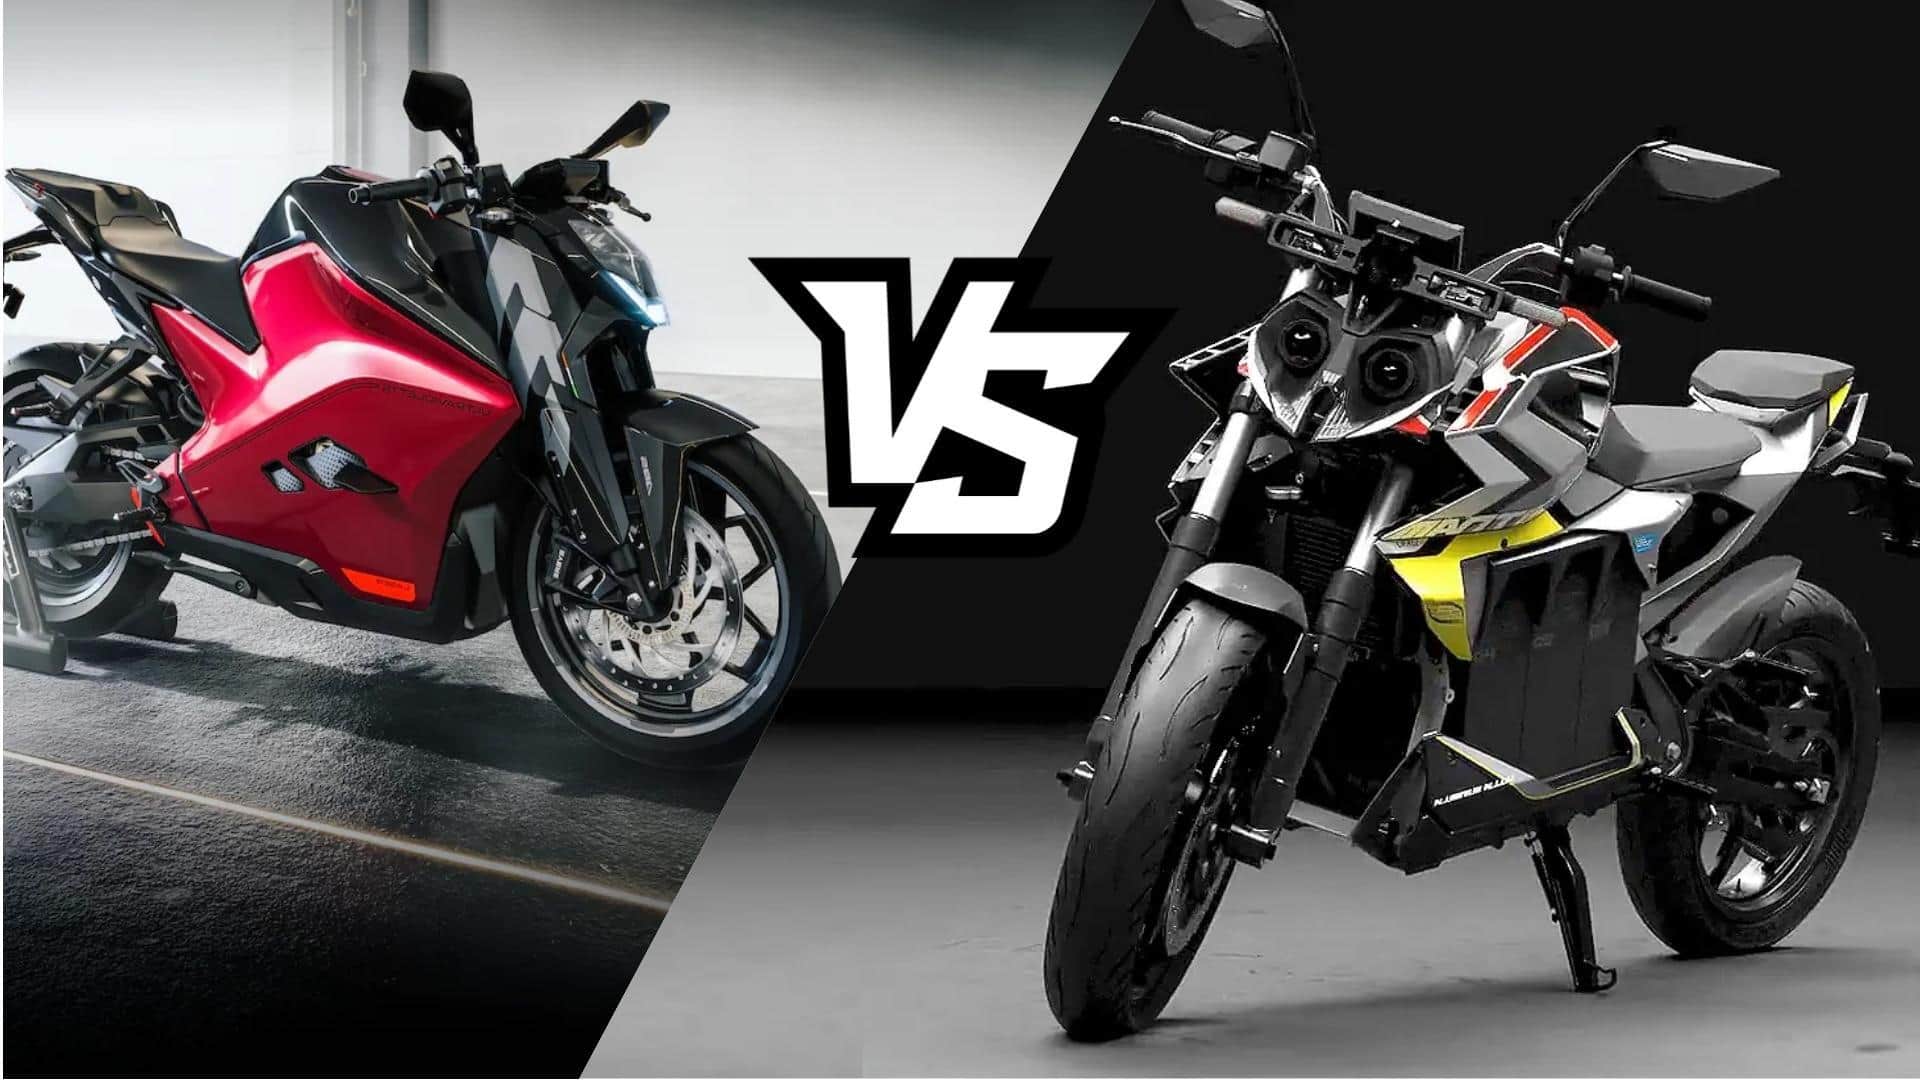 Orxa Mantis vs Ultraviolette F77: Which electric motorcycle is better